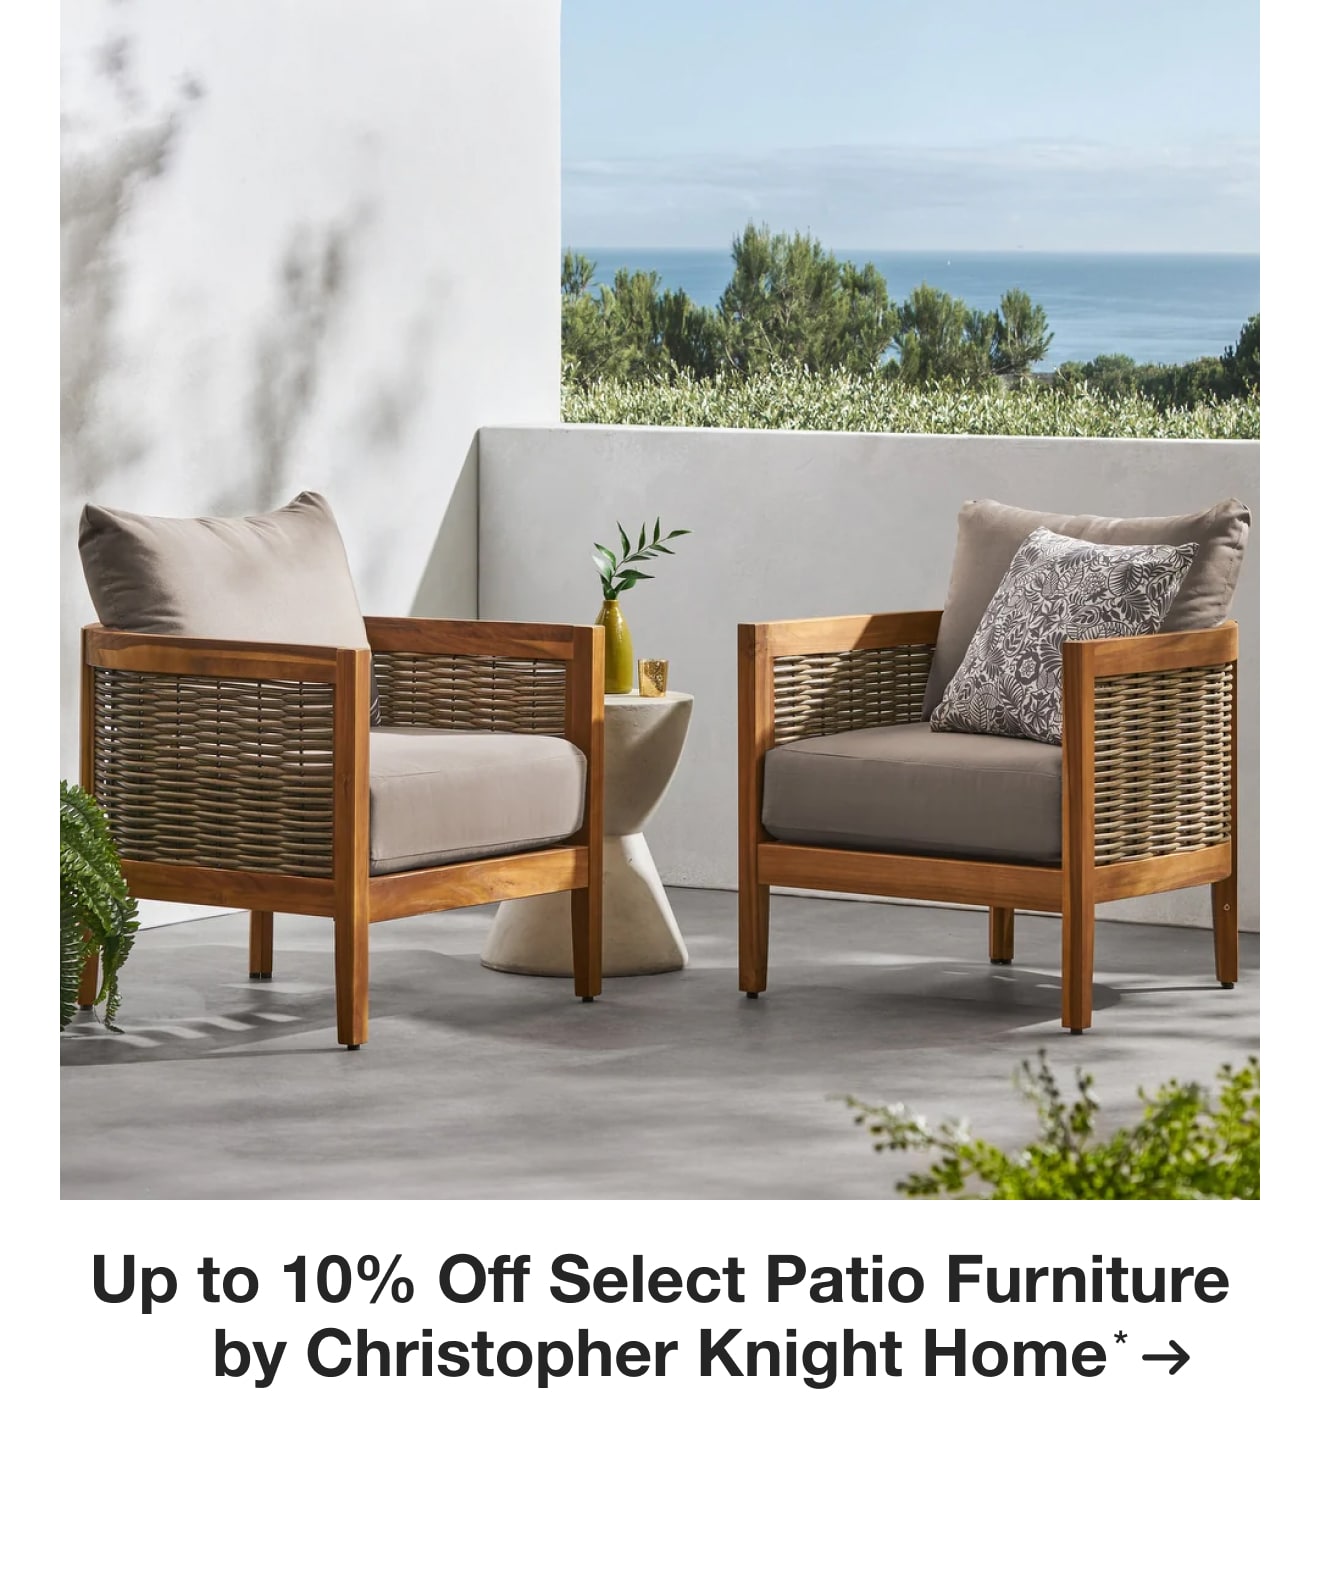 Up to 10% Off Select Patio Furniture by Christopher Knight Home*